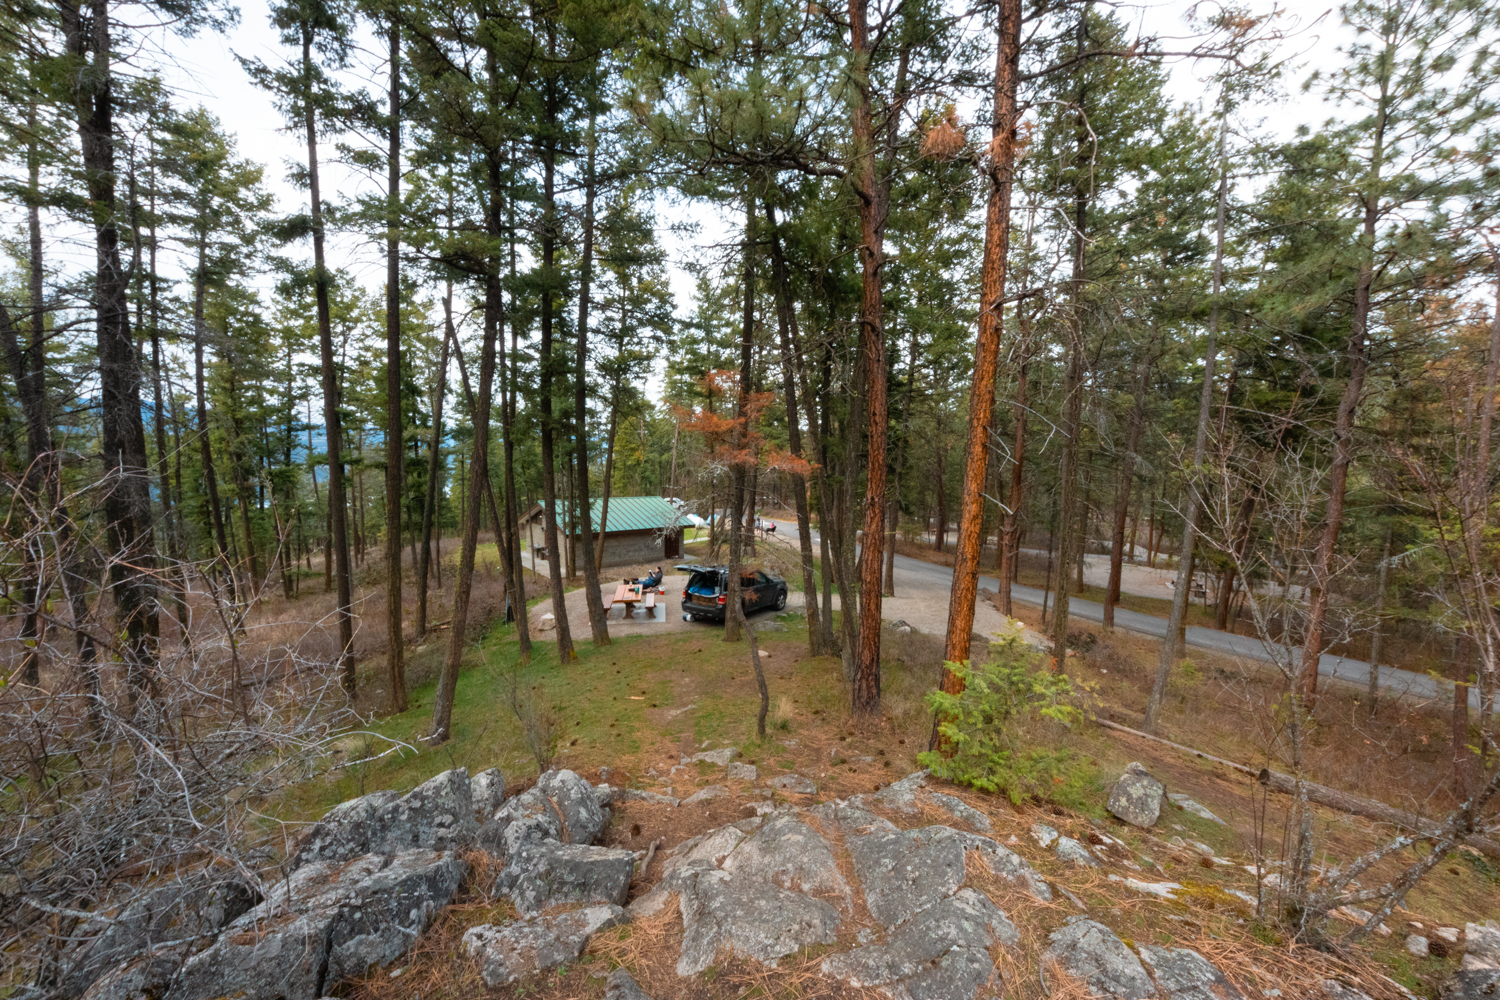 Looking down a large hill at a camping site at Ellison Provincial Park through the trees